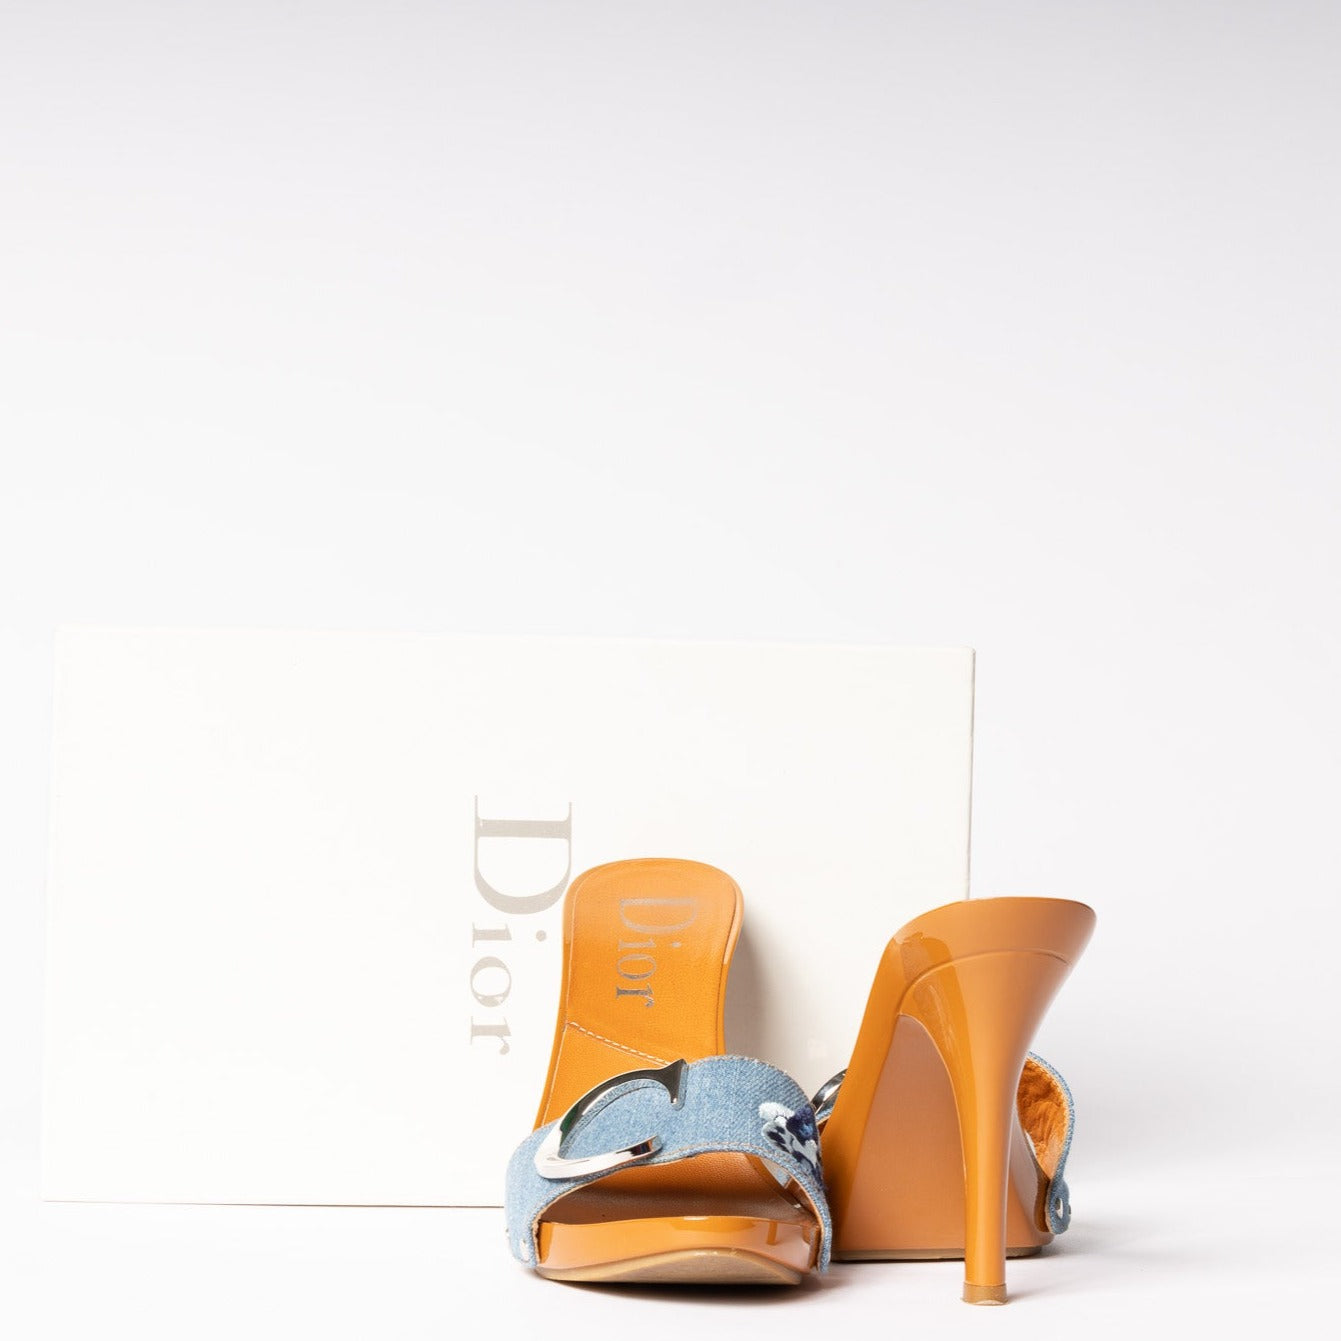 "Vintage Dior Denim Heels - Retro chic and timeless style in iconic footwear for a fashion-forward statement.